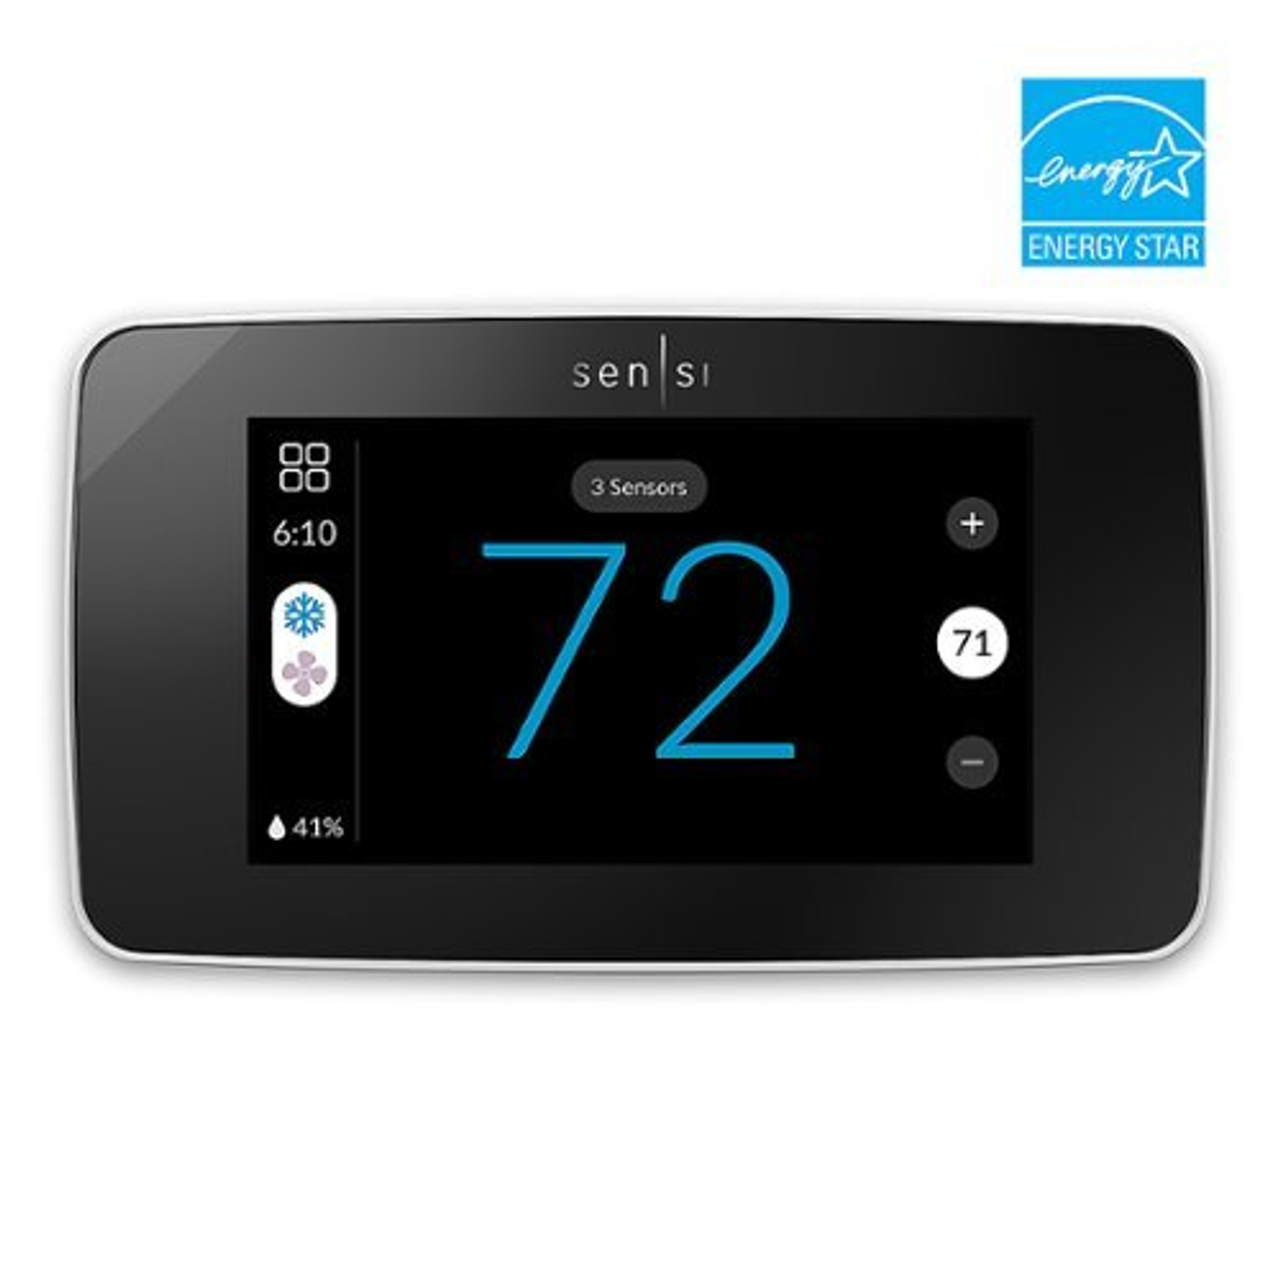 Emerson - Sensi Touch 2 Smart Programmable Wi-Fi Thermostat-Works with Alexa, C-Wire Required - White